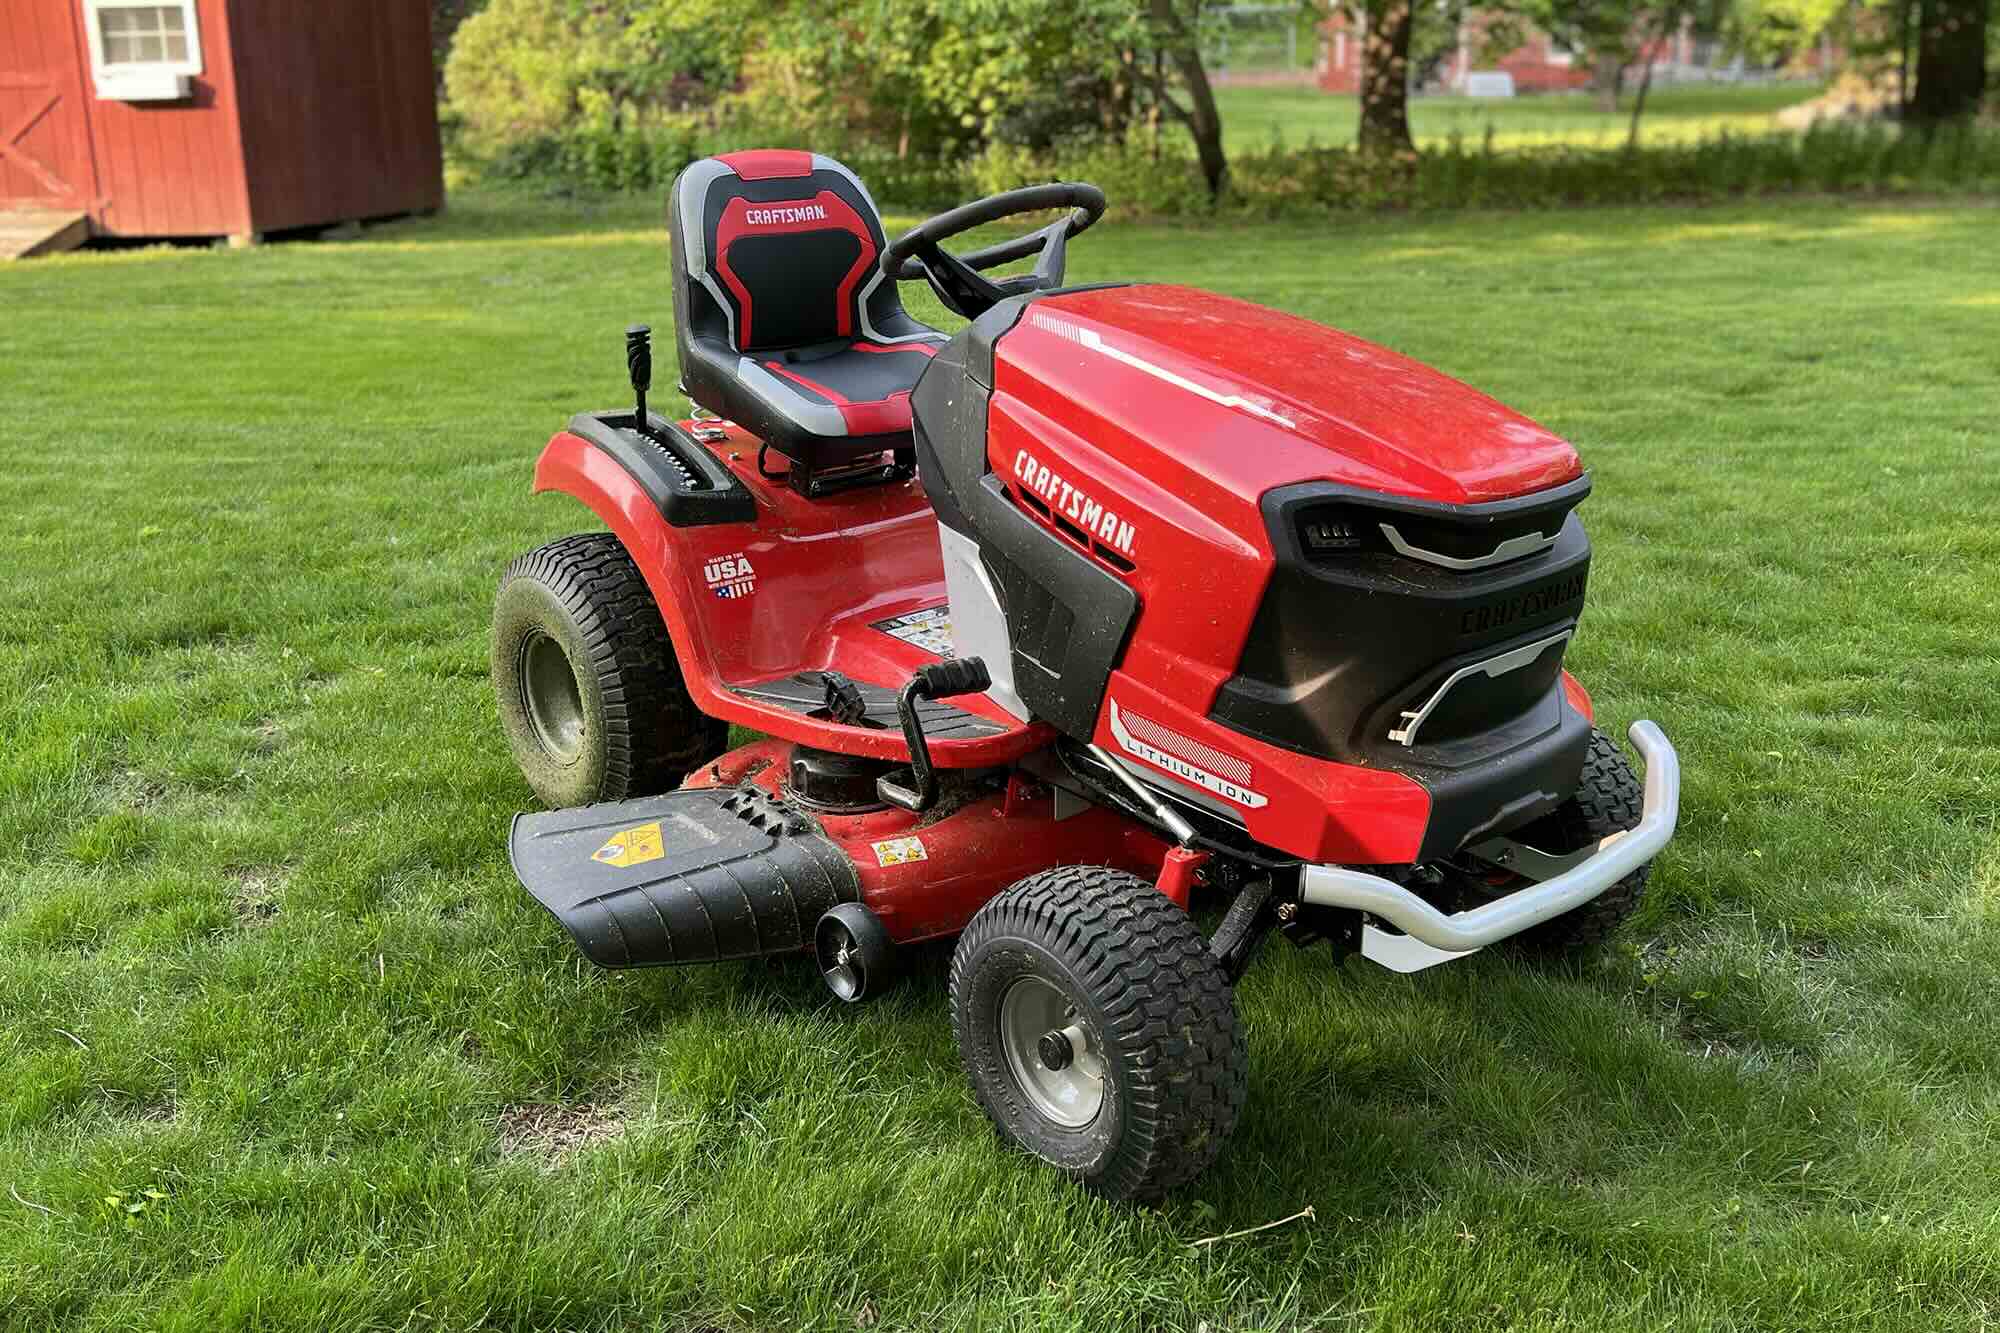 How To Change Oil On Craftsman Lawnmower